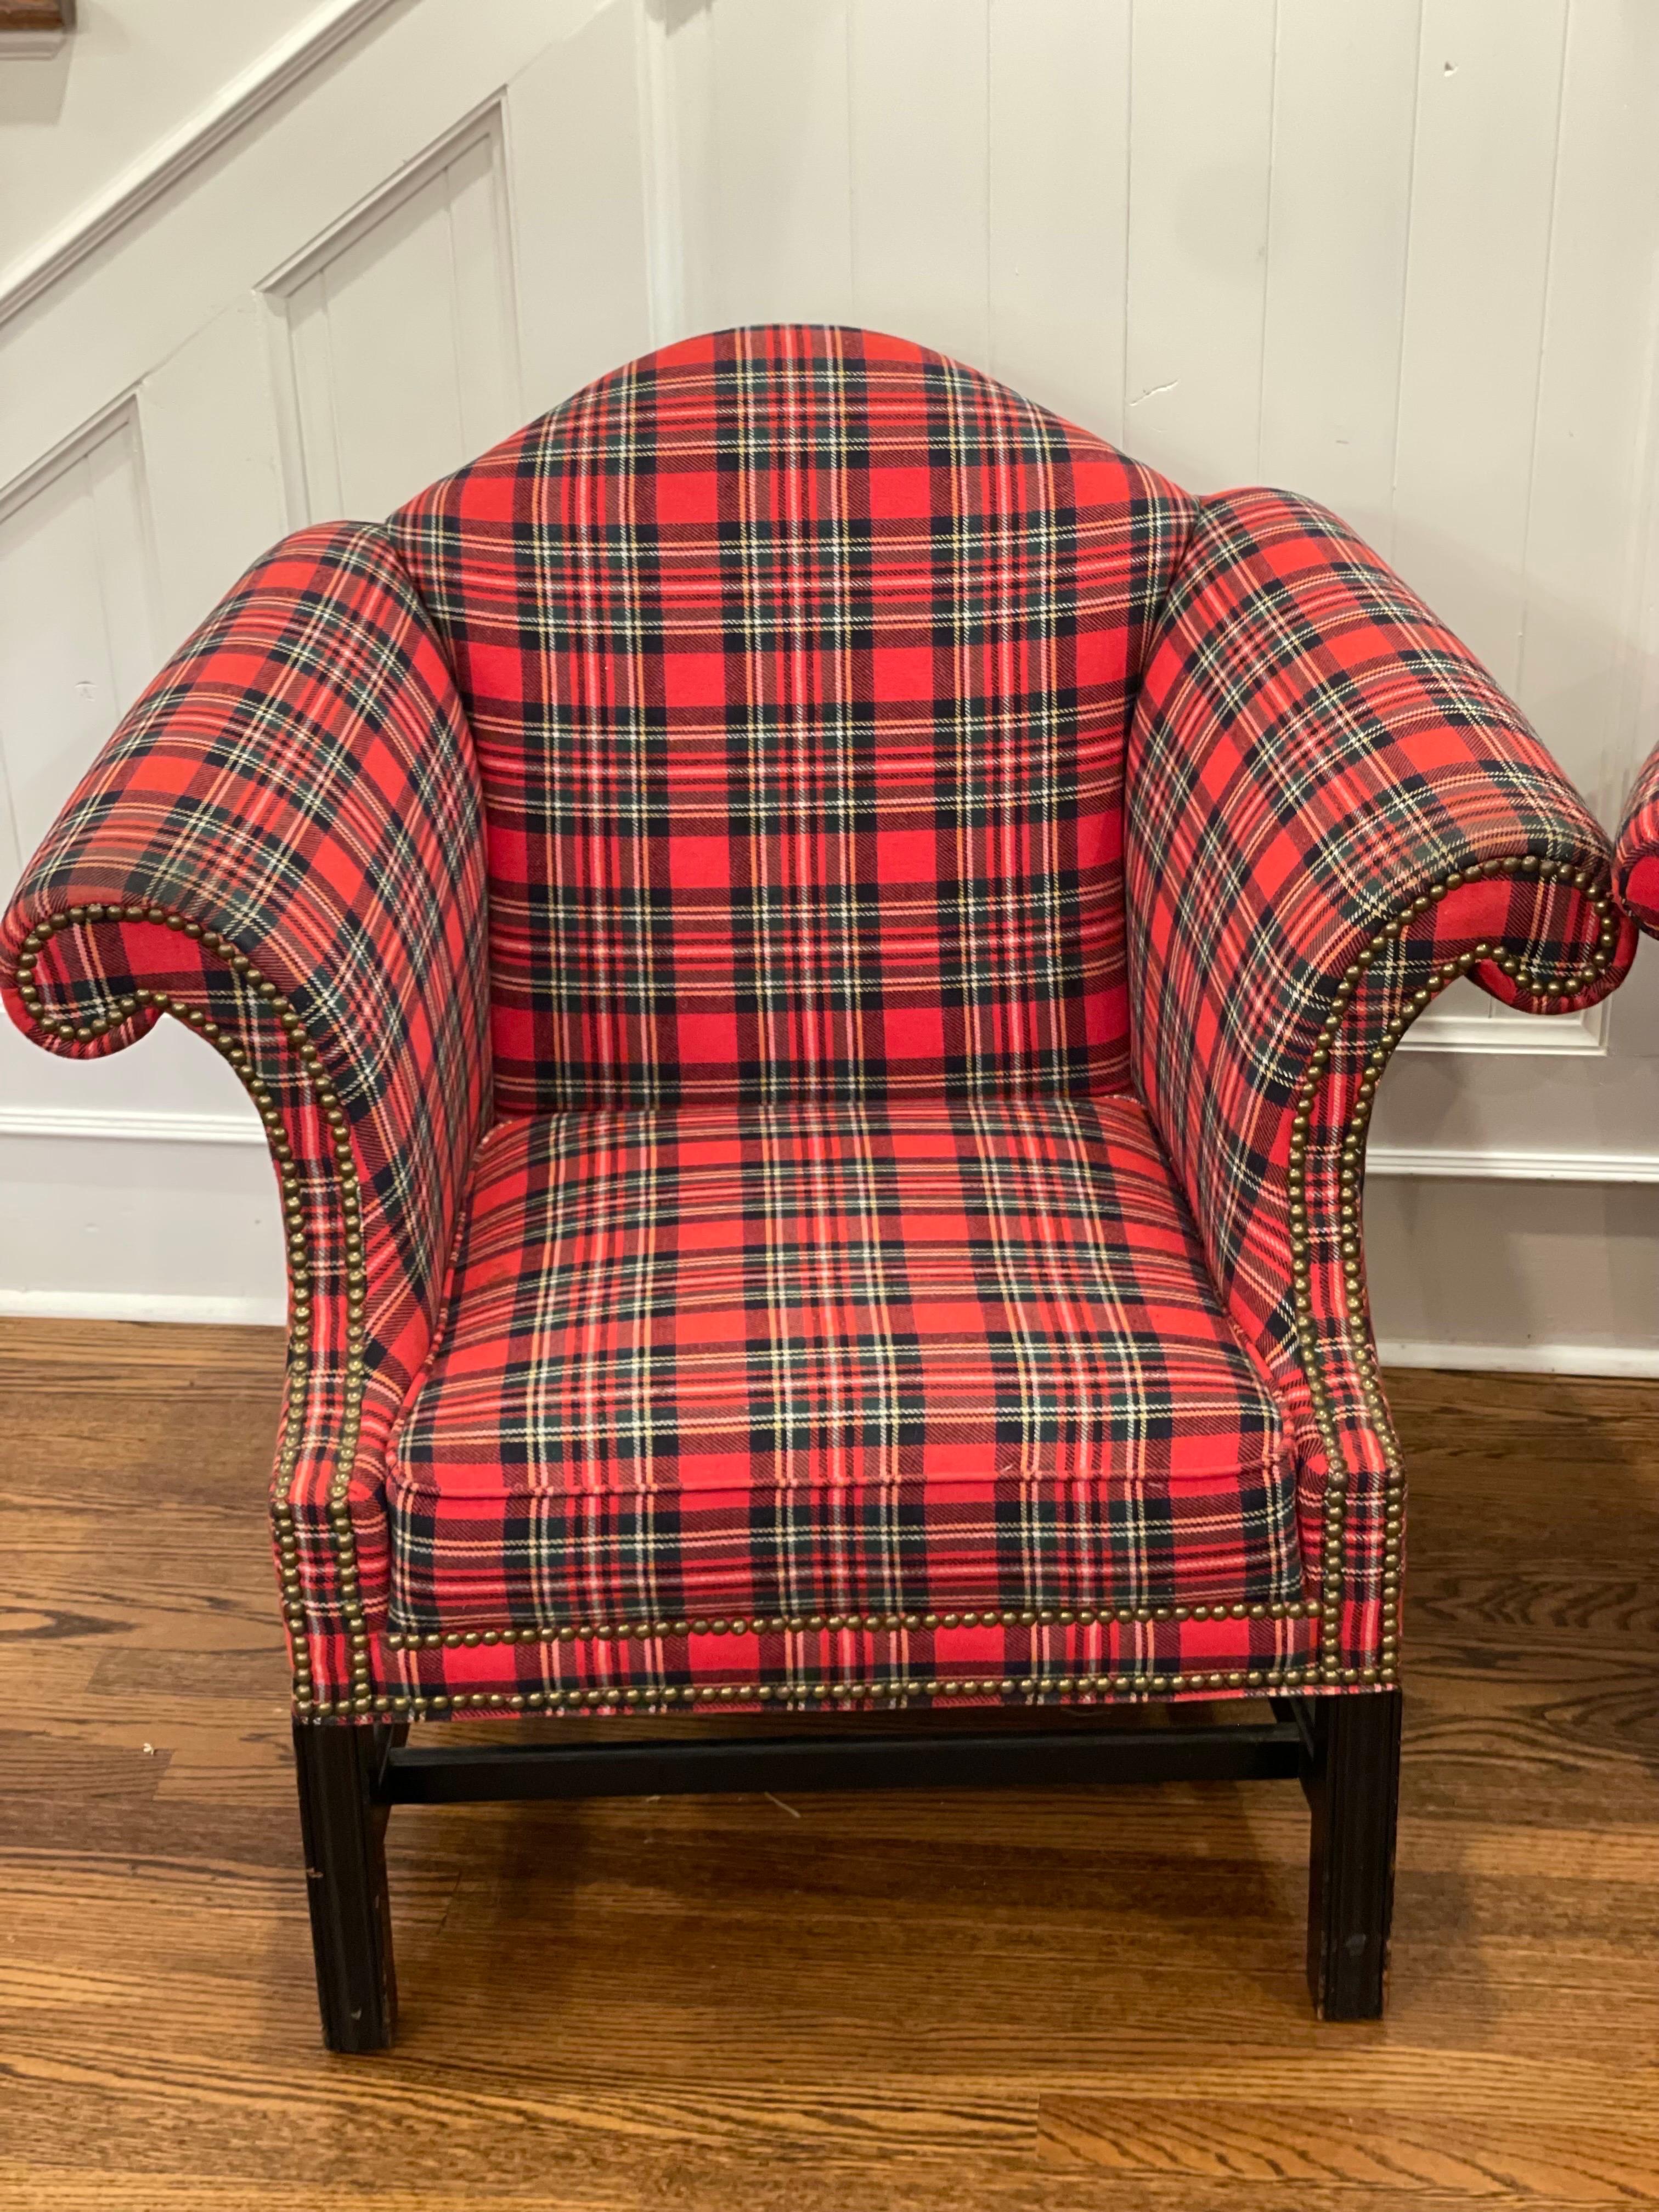 Vintage Ralph Lauren Style Red Tartan/Plaid Nailhead Studded Pair of Club Chairs.

Absolutely gorgeous Vintage Ralph Lauren Style Red Tartan/Plaid Nailhead Studded Pair of Club Chair by Hickory NC Ashley Manor.